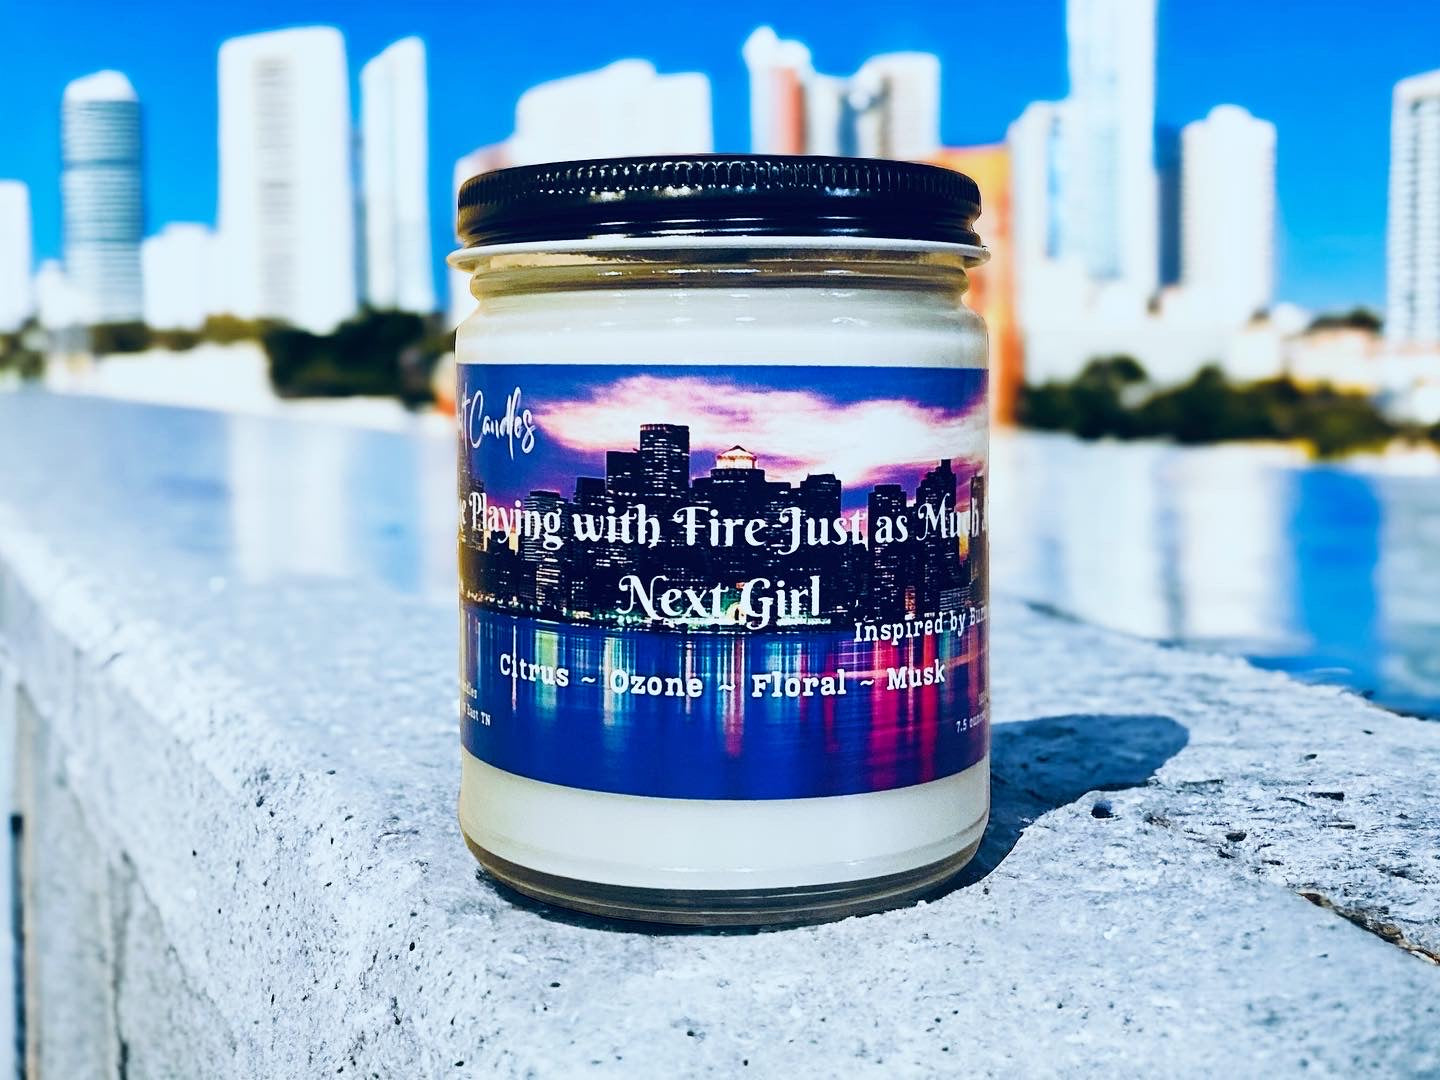 I Like Playing with Fire Just as Much as the Next Girl - Burn Notice inspired - candle